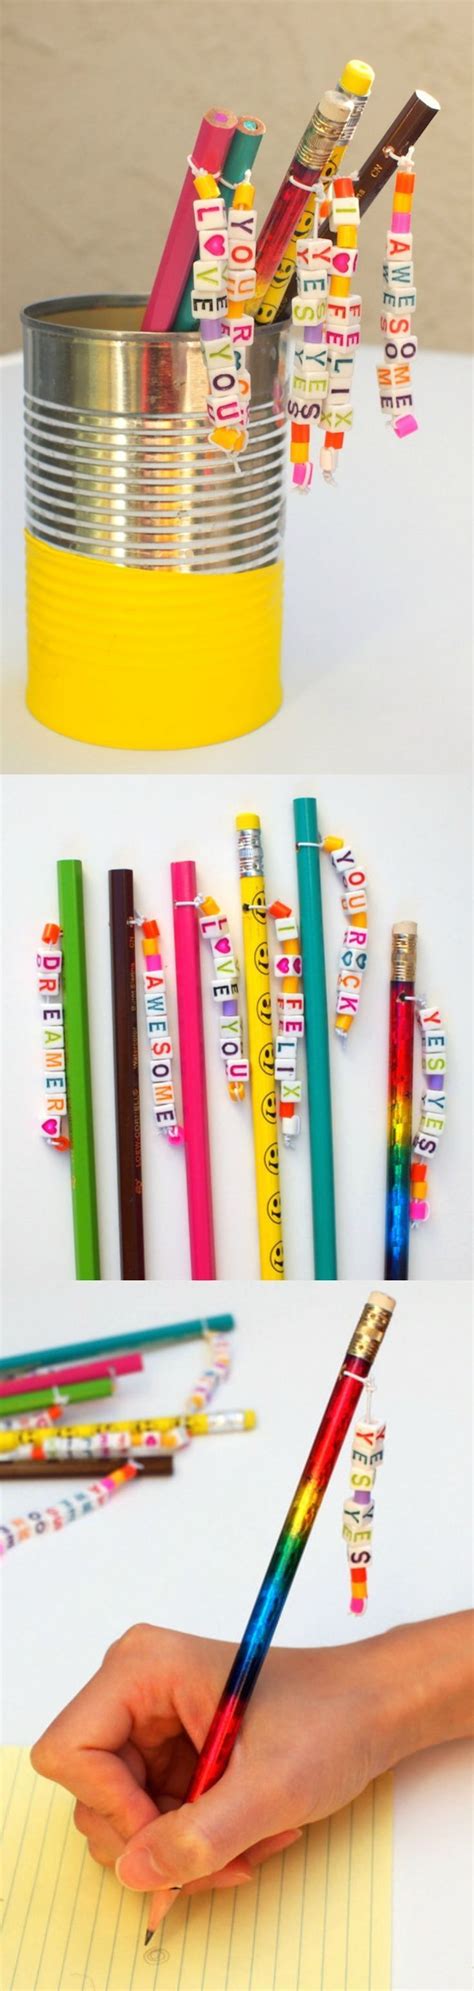 Diy Pencil Toppers The Kids Will Love Pencil Toppers Market Day